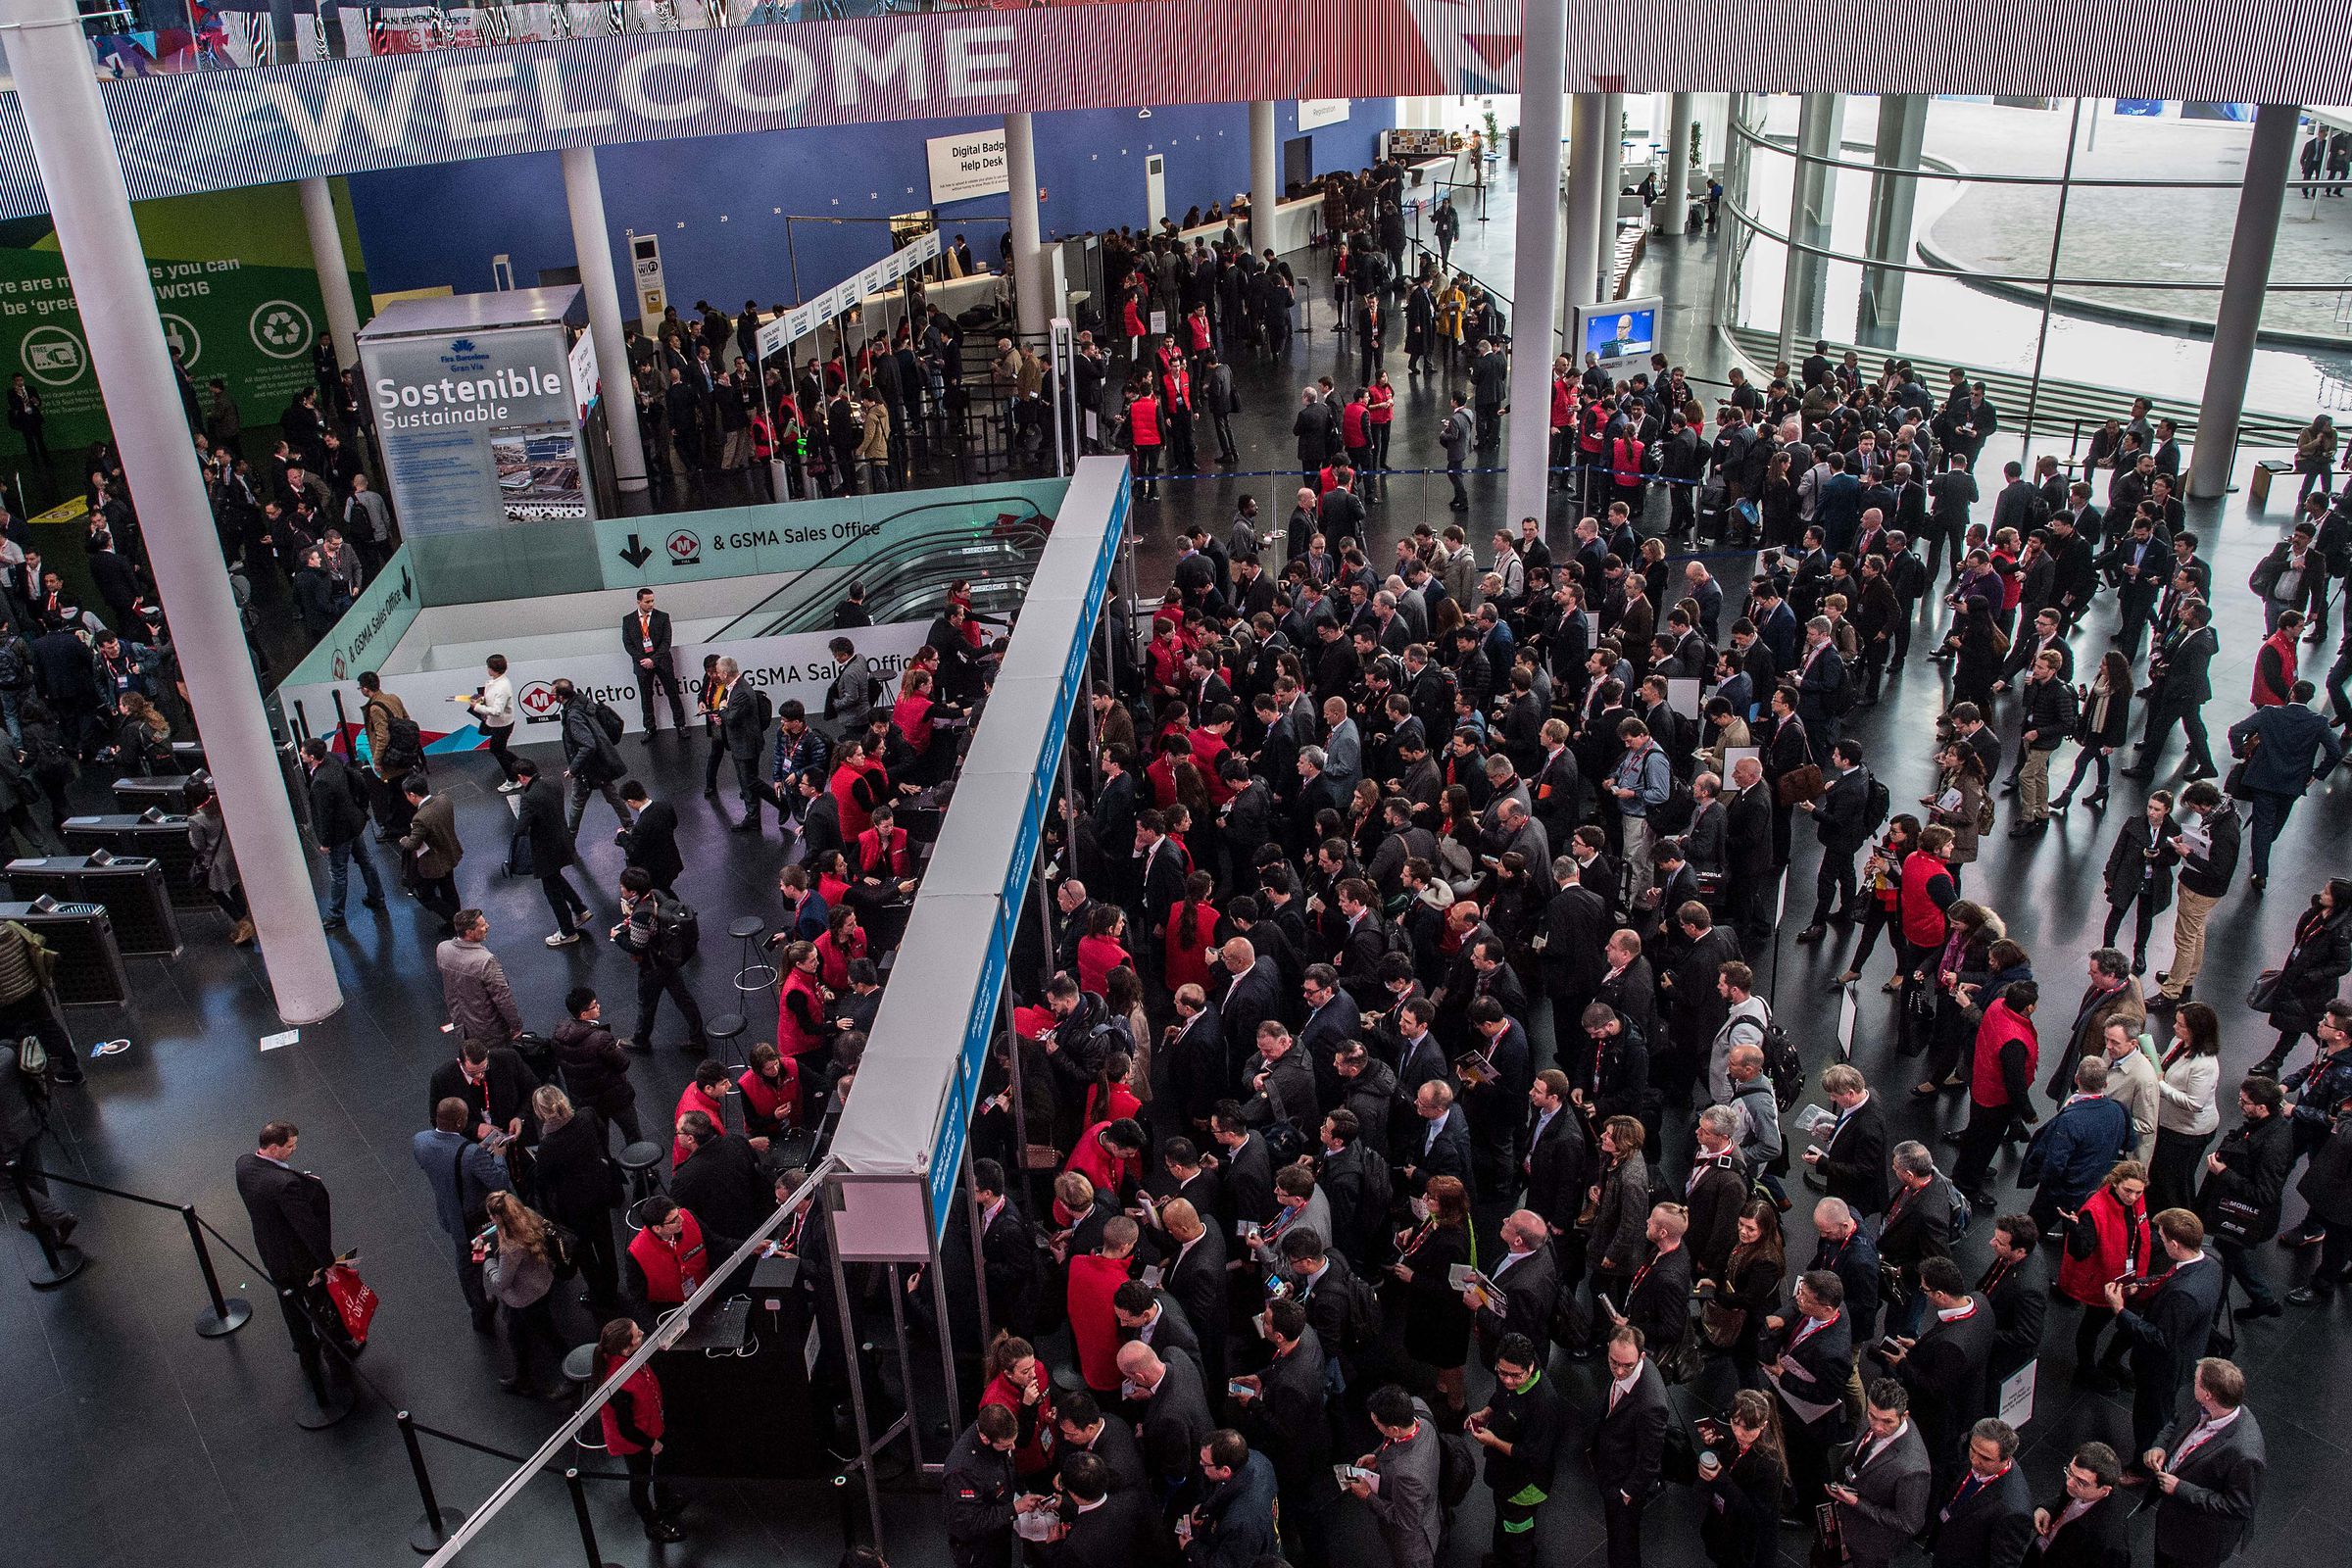 Mobile World Congress - Day 1